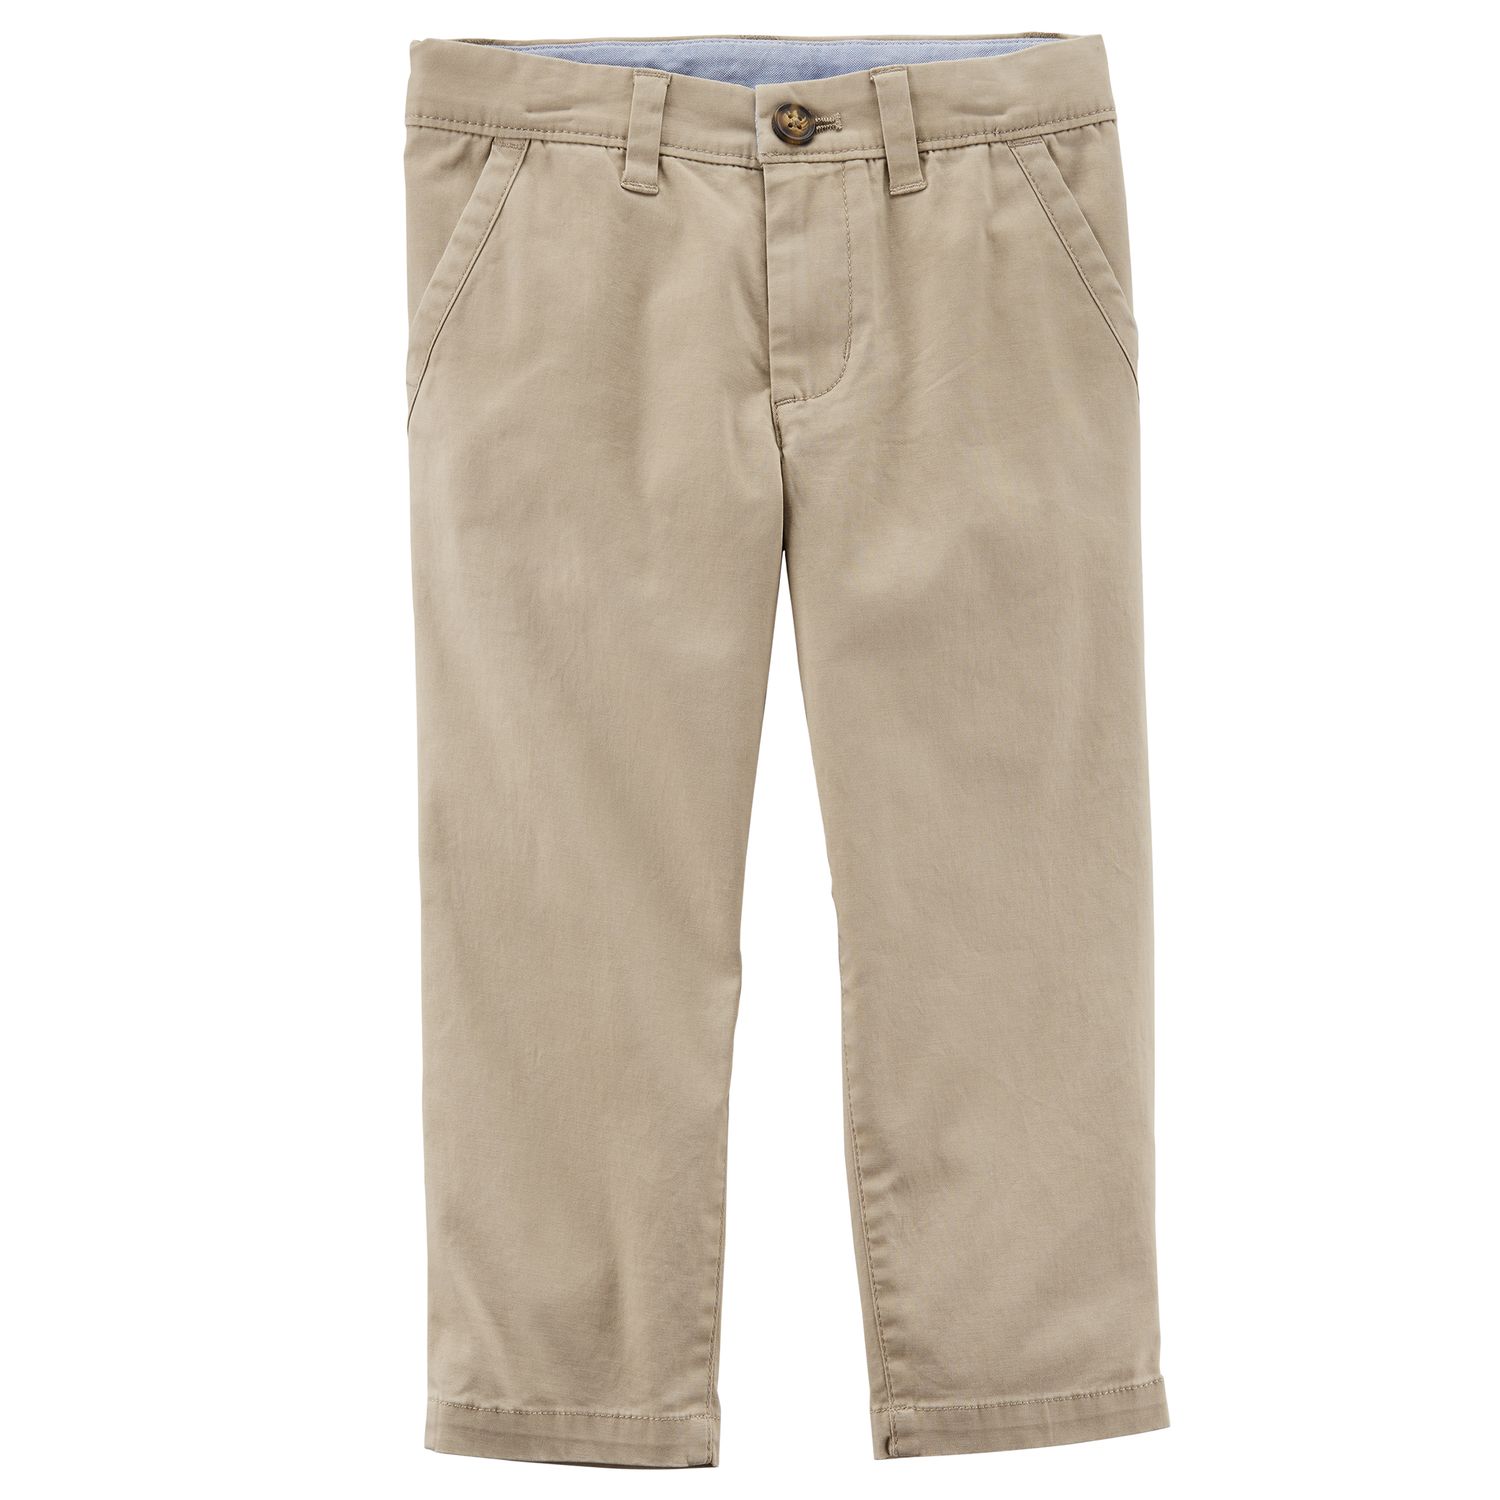 chino pants for baby boy